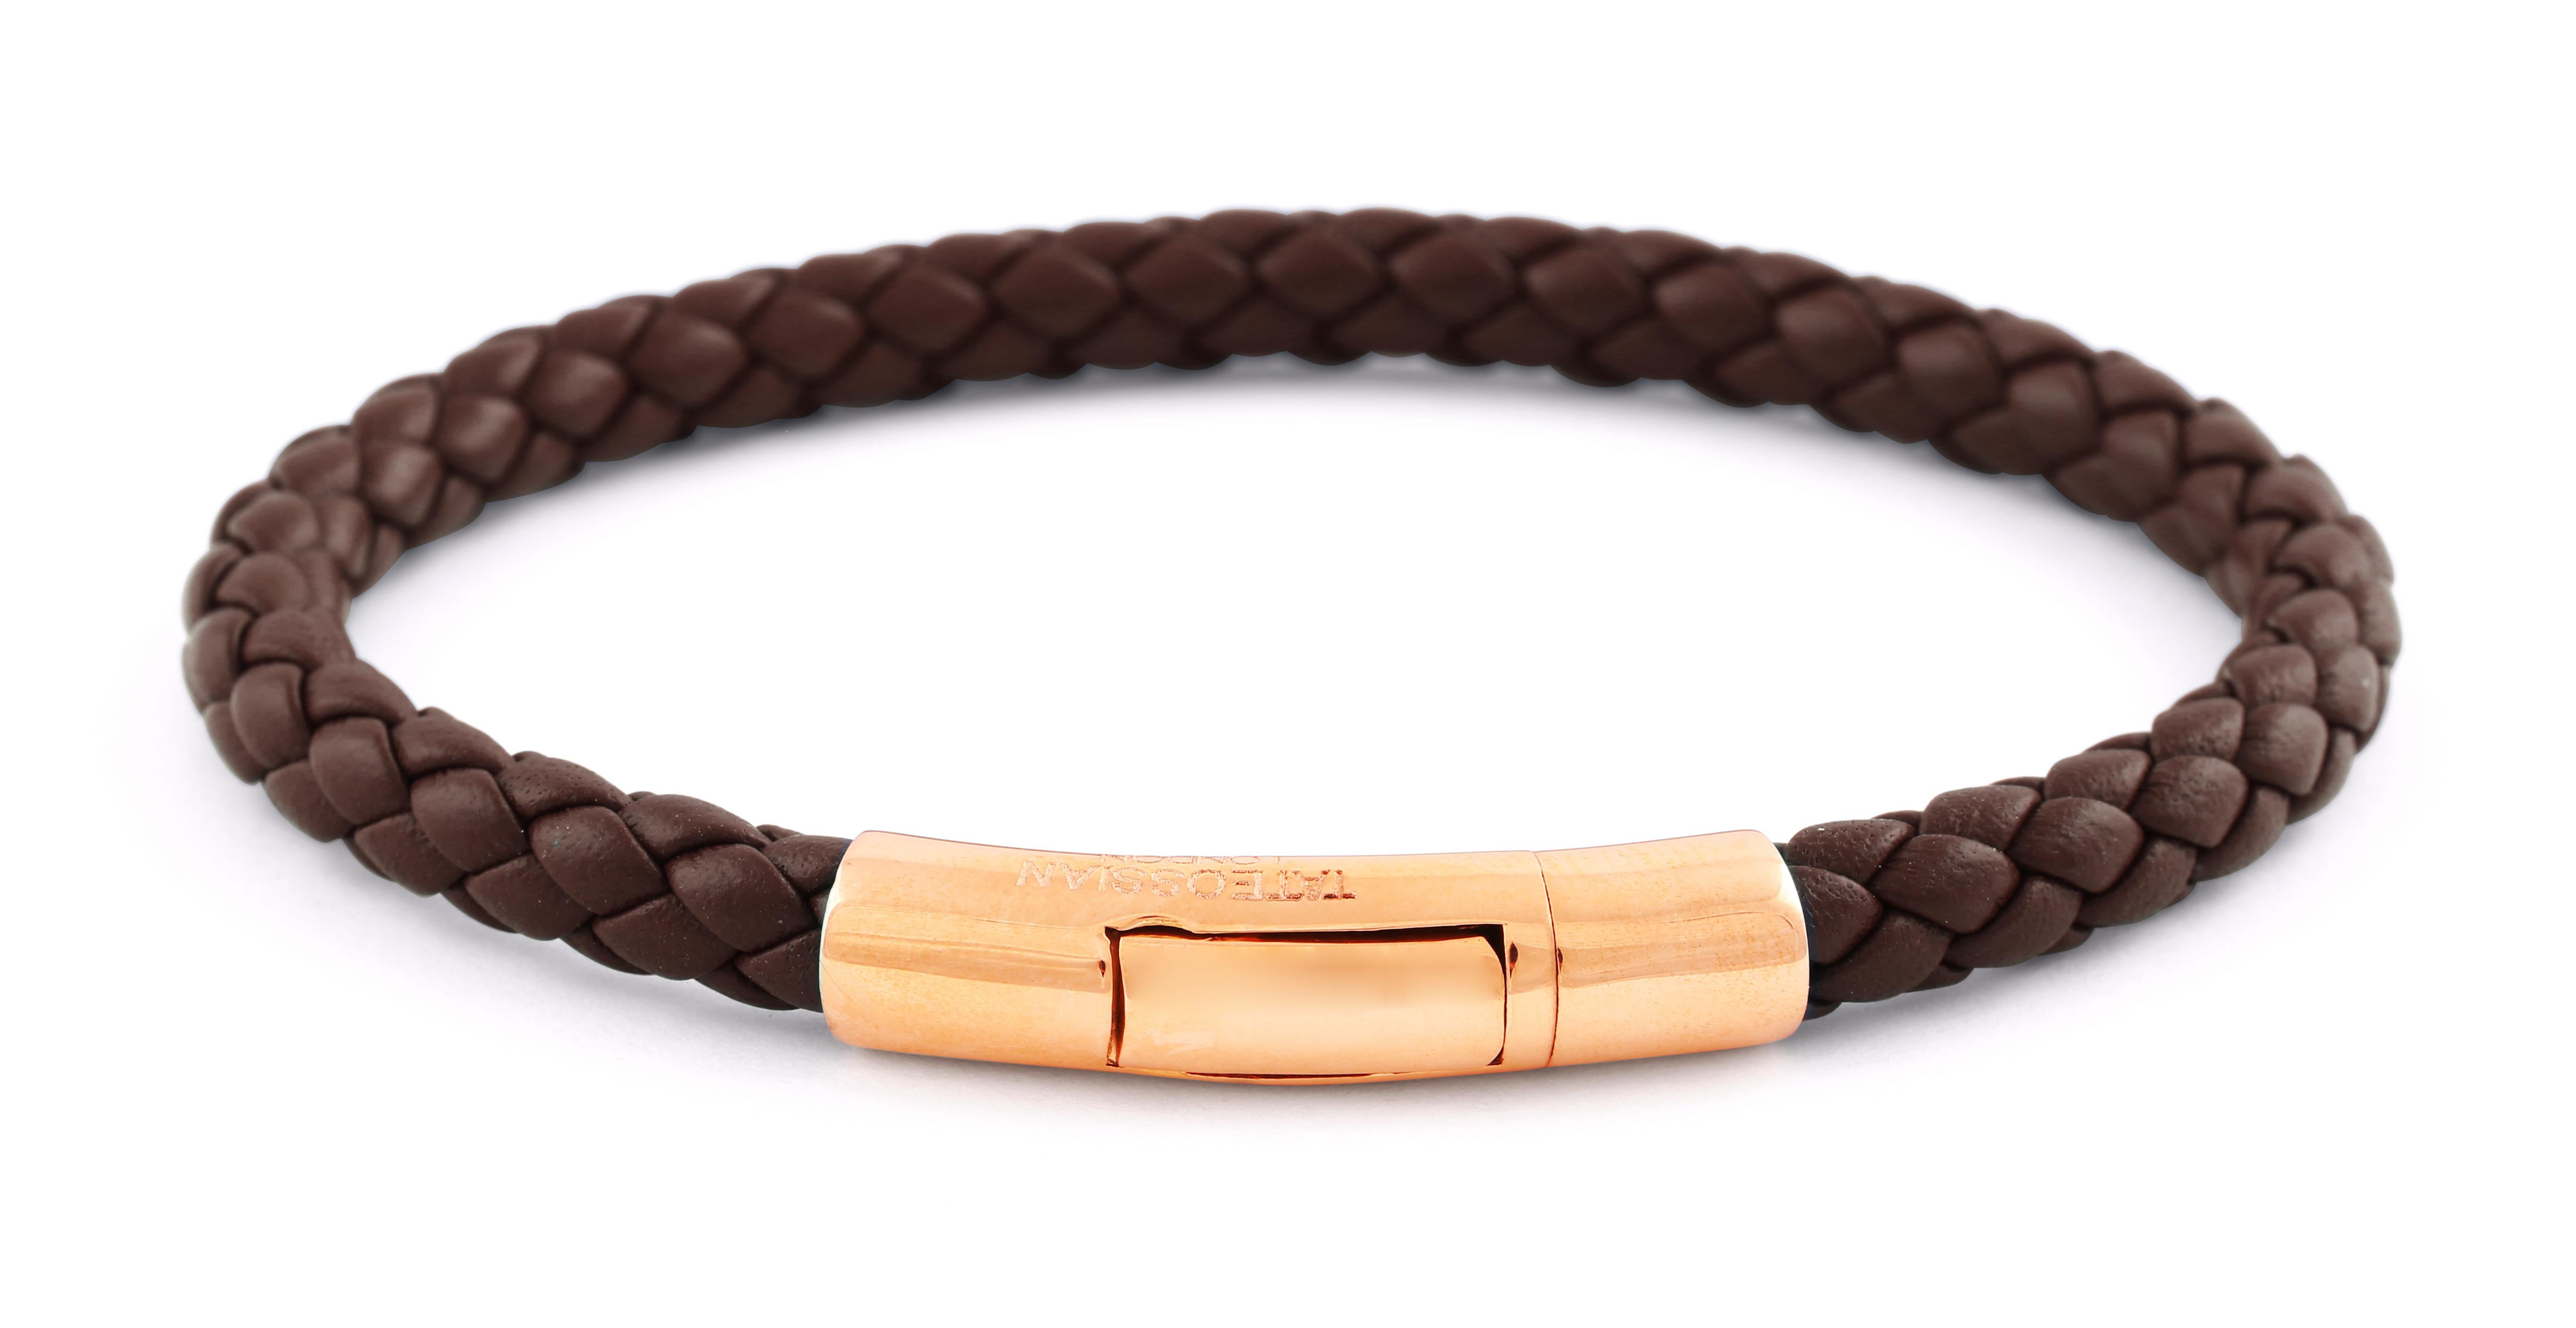 Genuine brown-coloured Italian leather is intricately hand-wrapped into our classic braid design, securely fastened with an 18k rose gold click clasp, all meticulously engineered in our Italian workshop. To open, simply push and hold the centre of